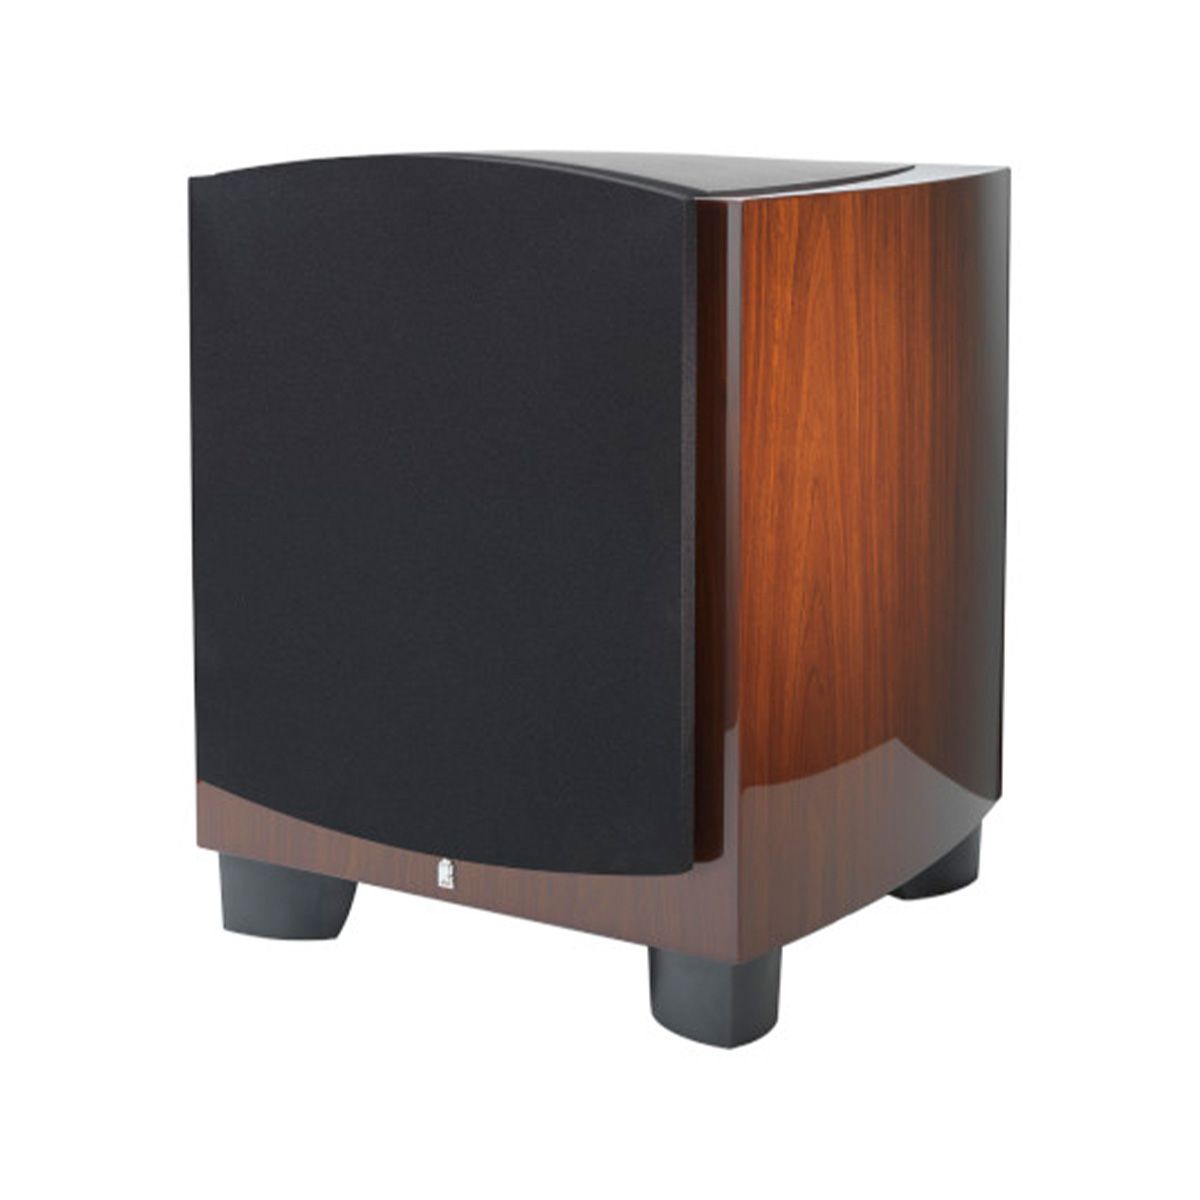 Revel B112v2 12” 1000W Powered Subwoofer - walnut single with grille - angled front view